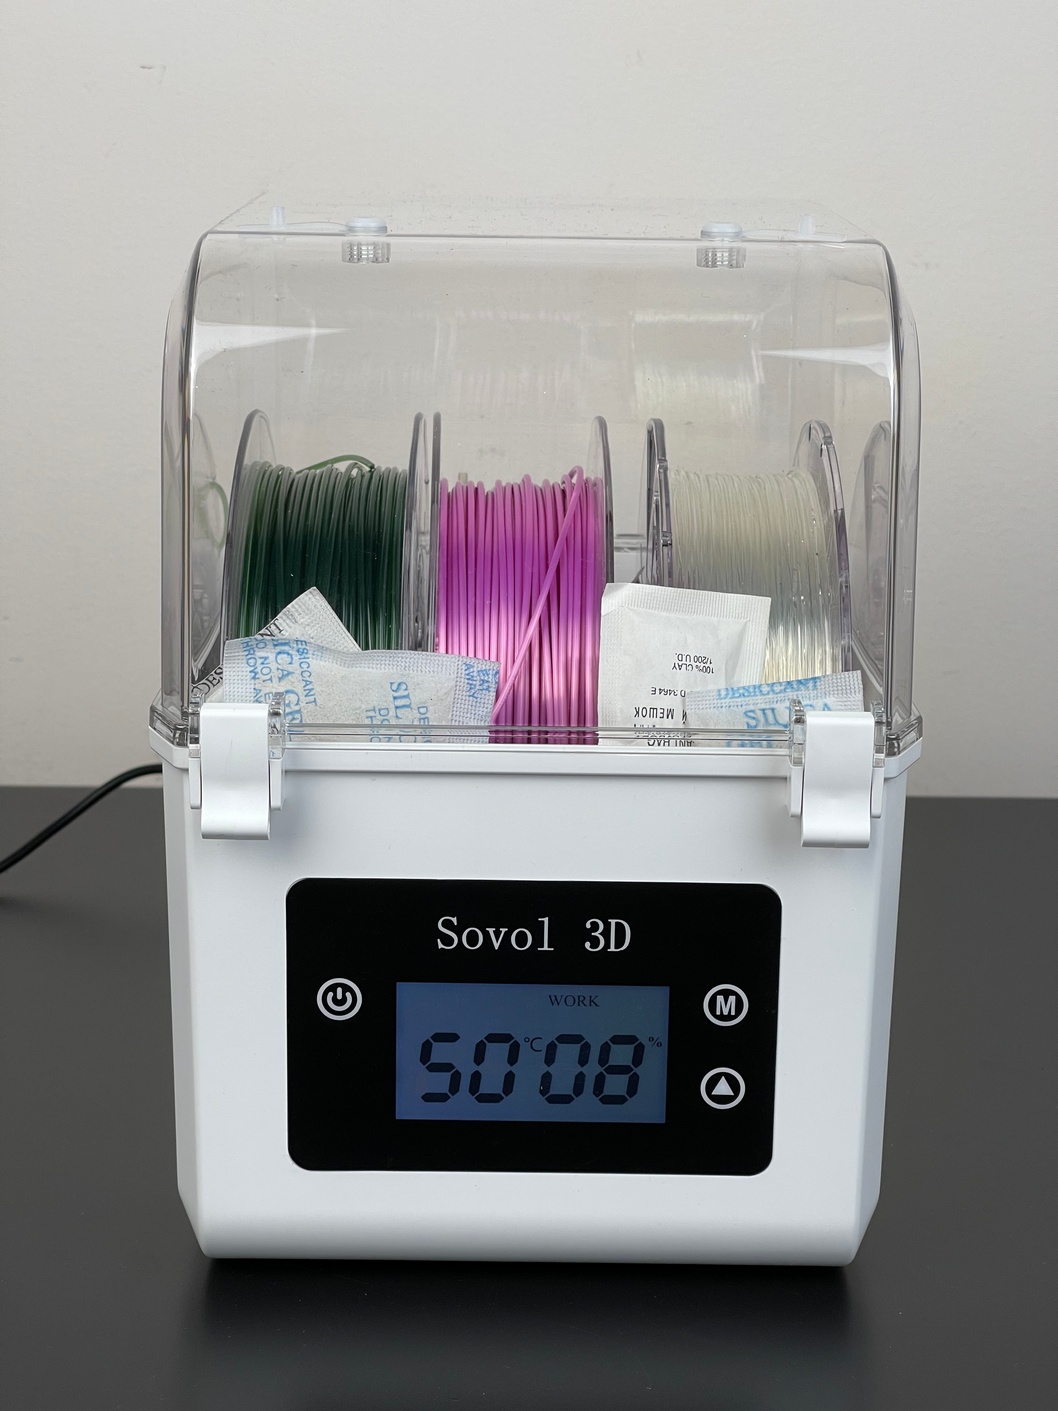 Sovol Filament Drier performance with dessicant 1 6 hours | Sovol Filament Dryer Review: Does it really work?